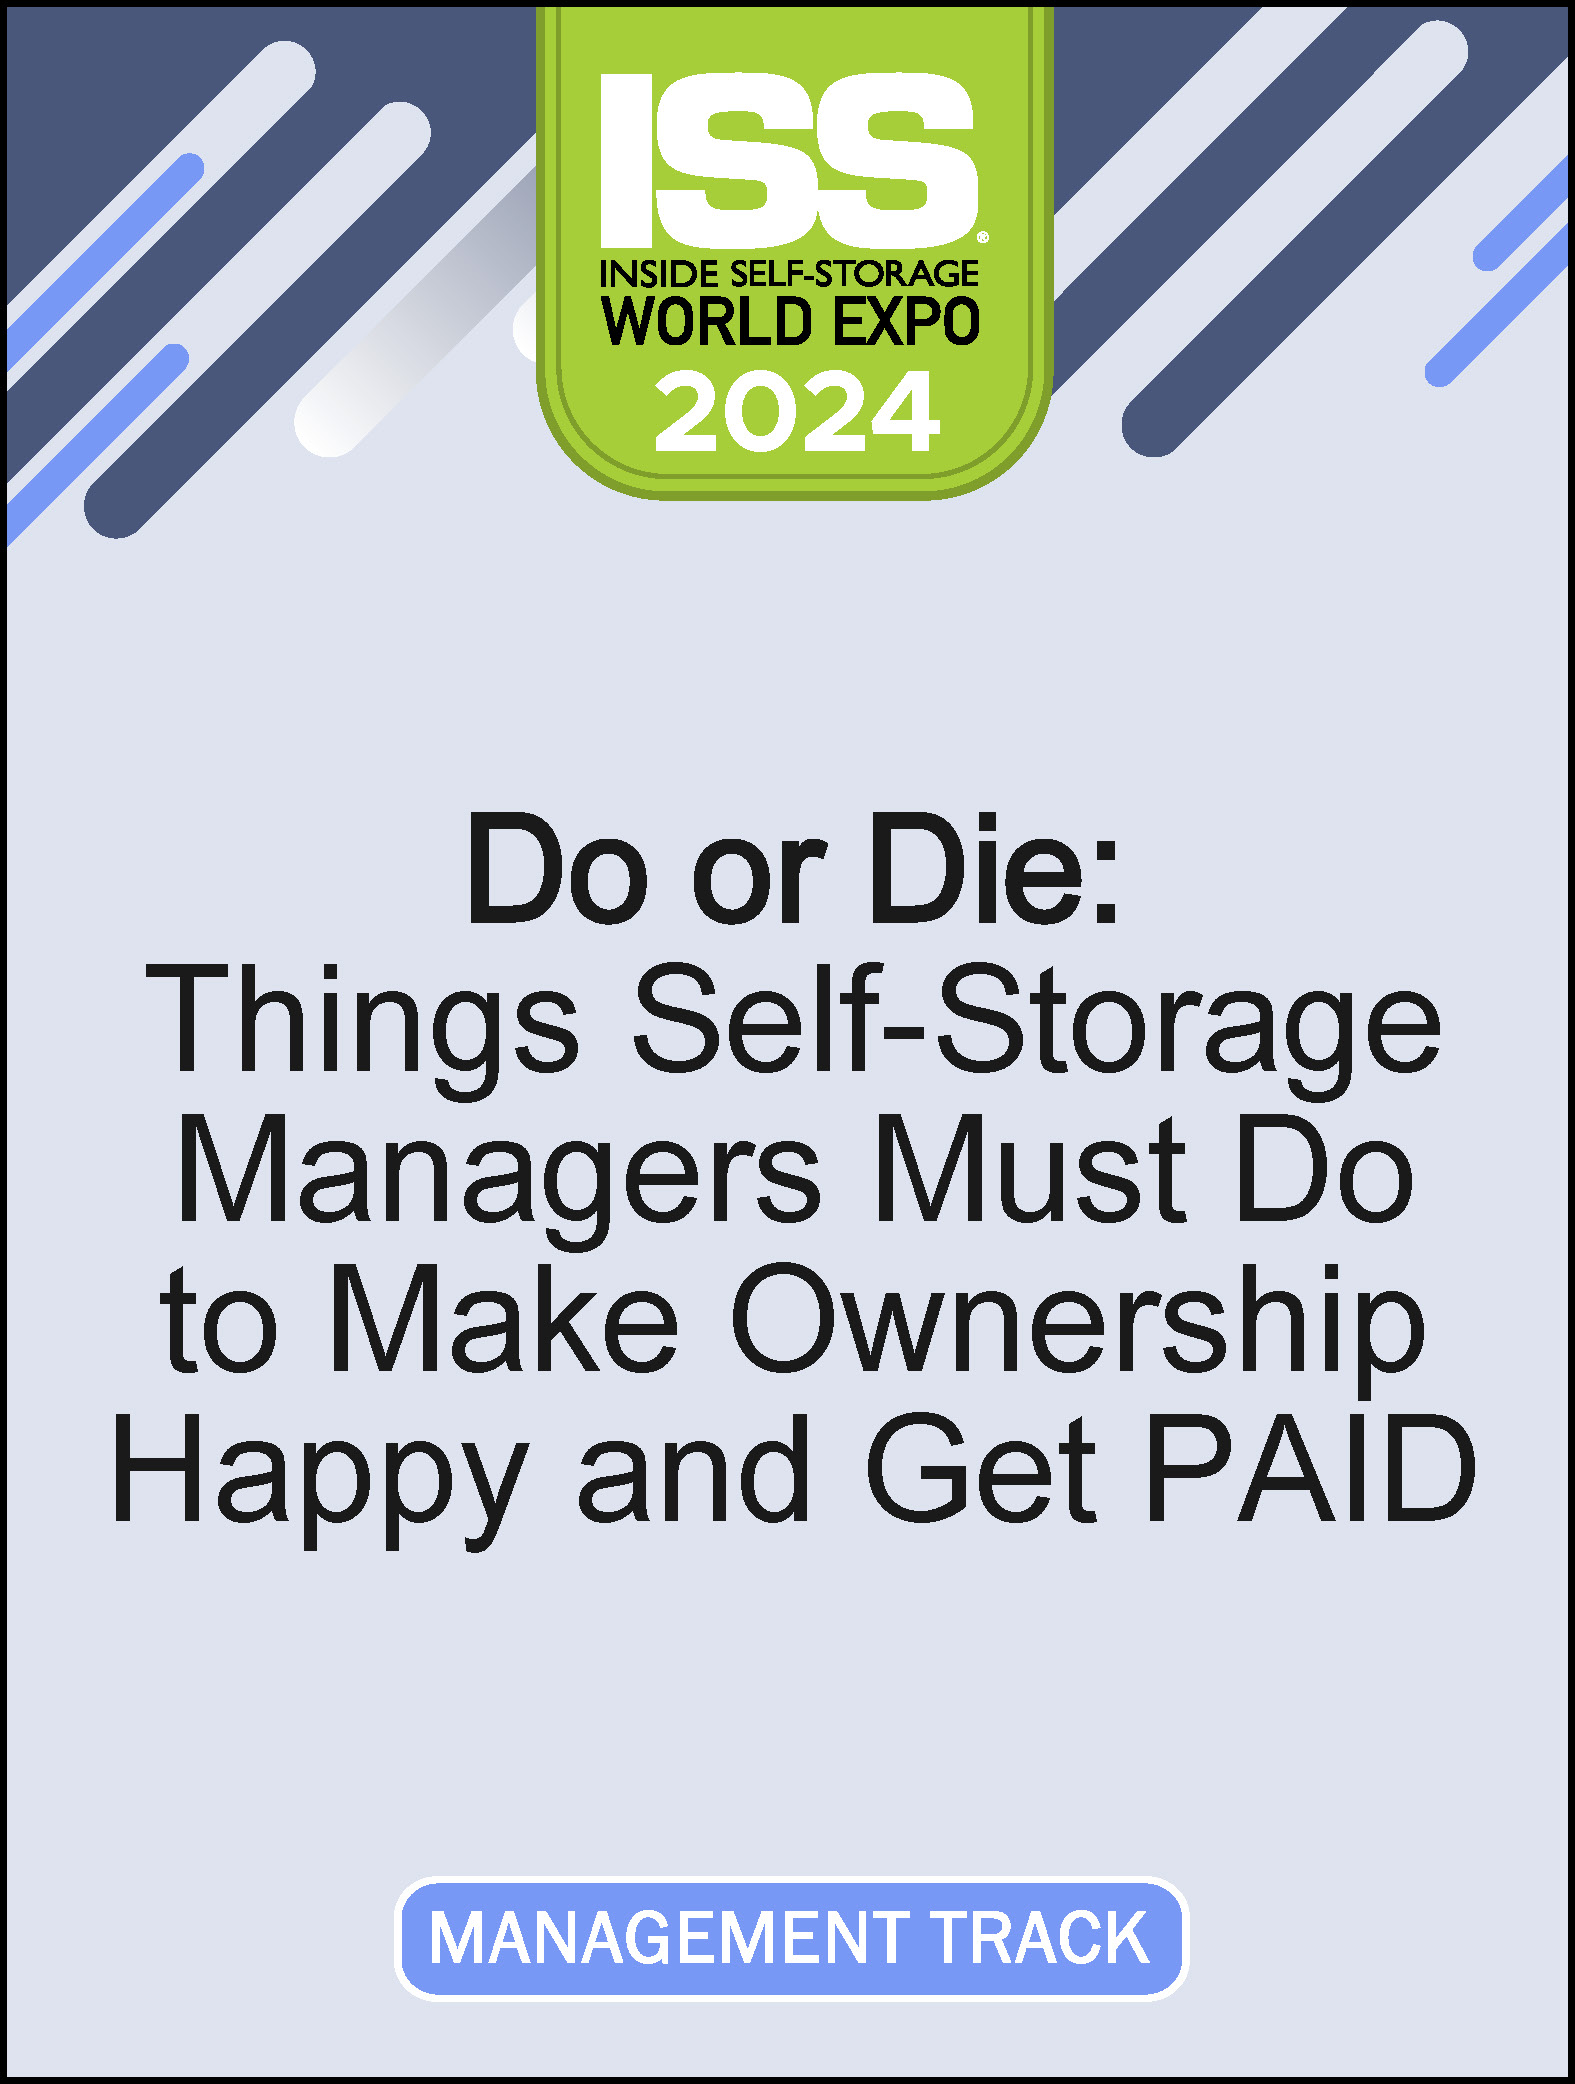 Video Pre-Order Sub - Do or Die: Things Self-Storage Managers Must Do to Make Ownership Happy and Get PAID